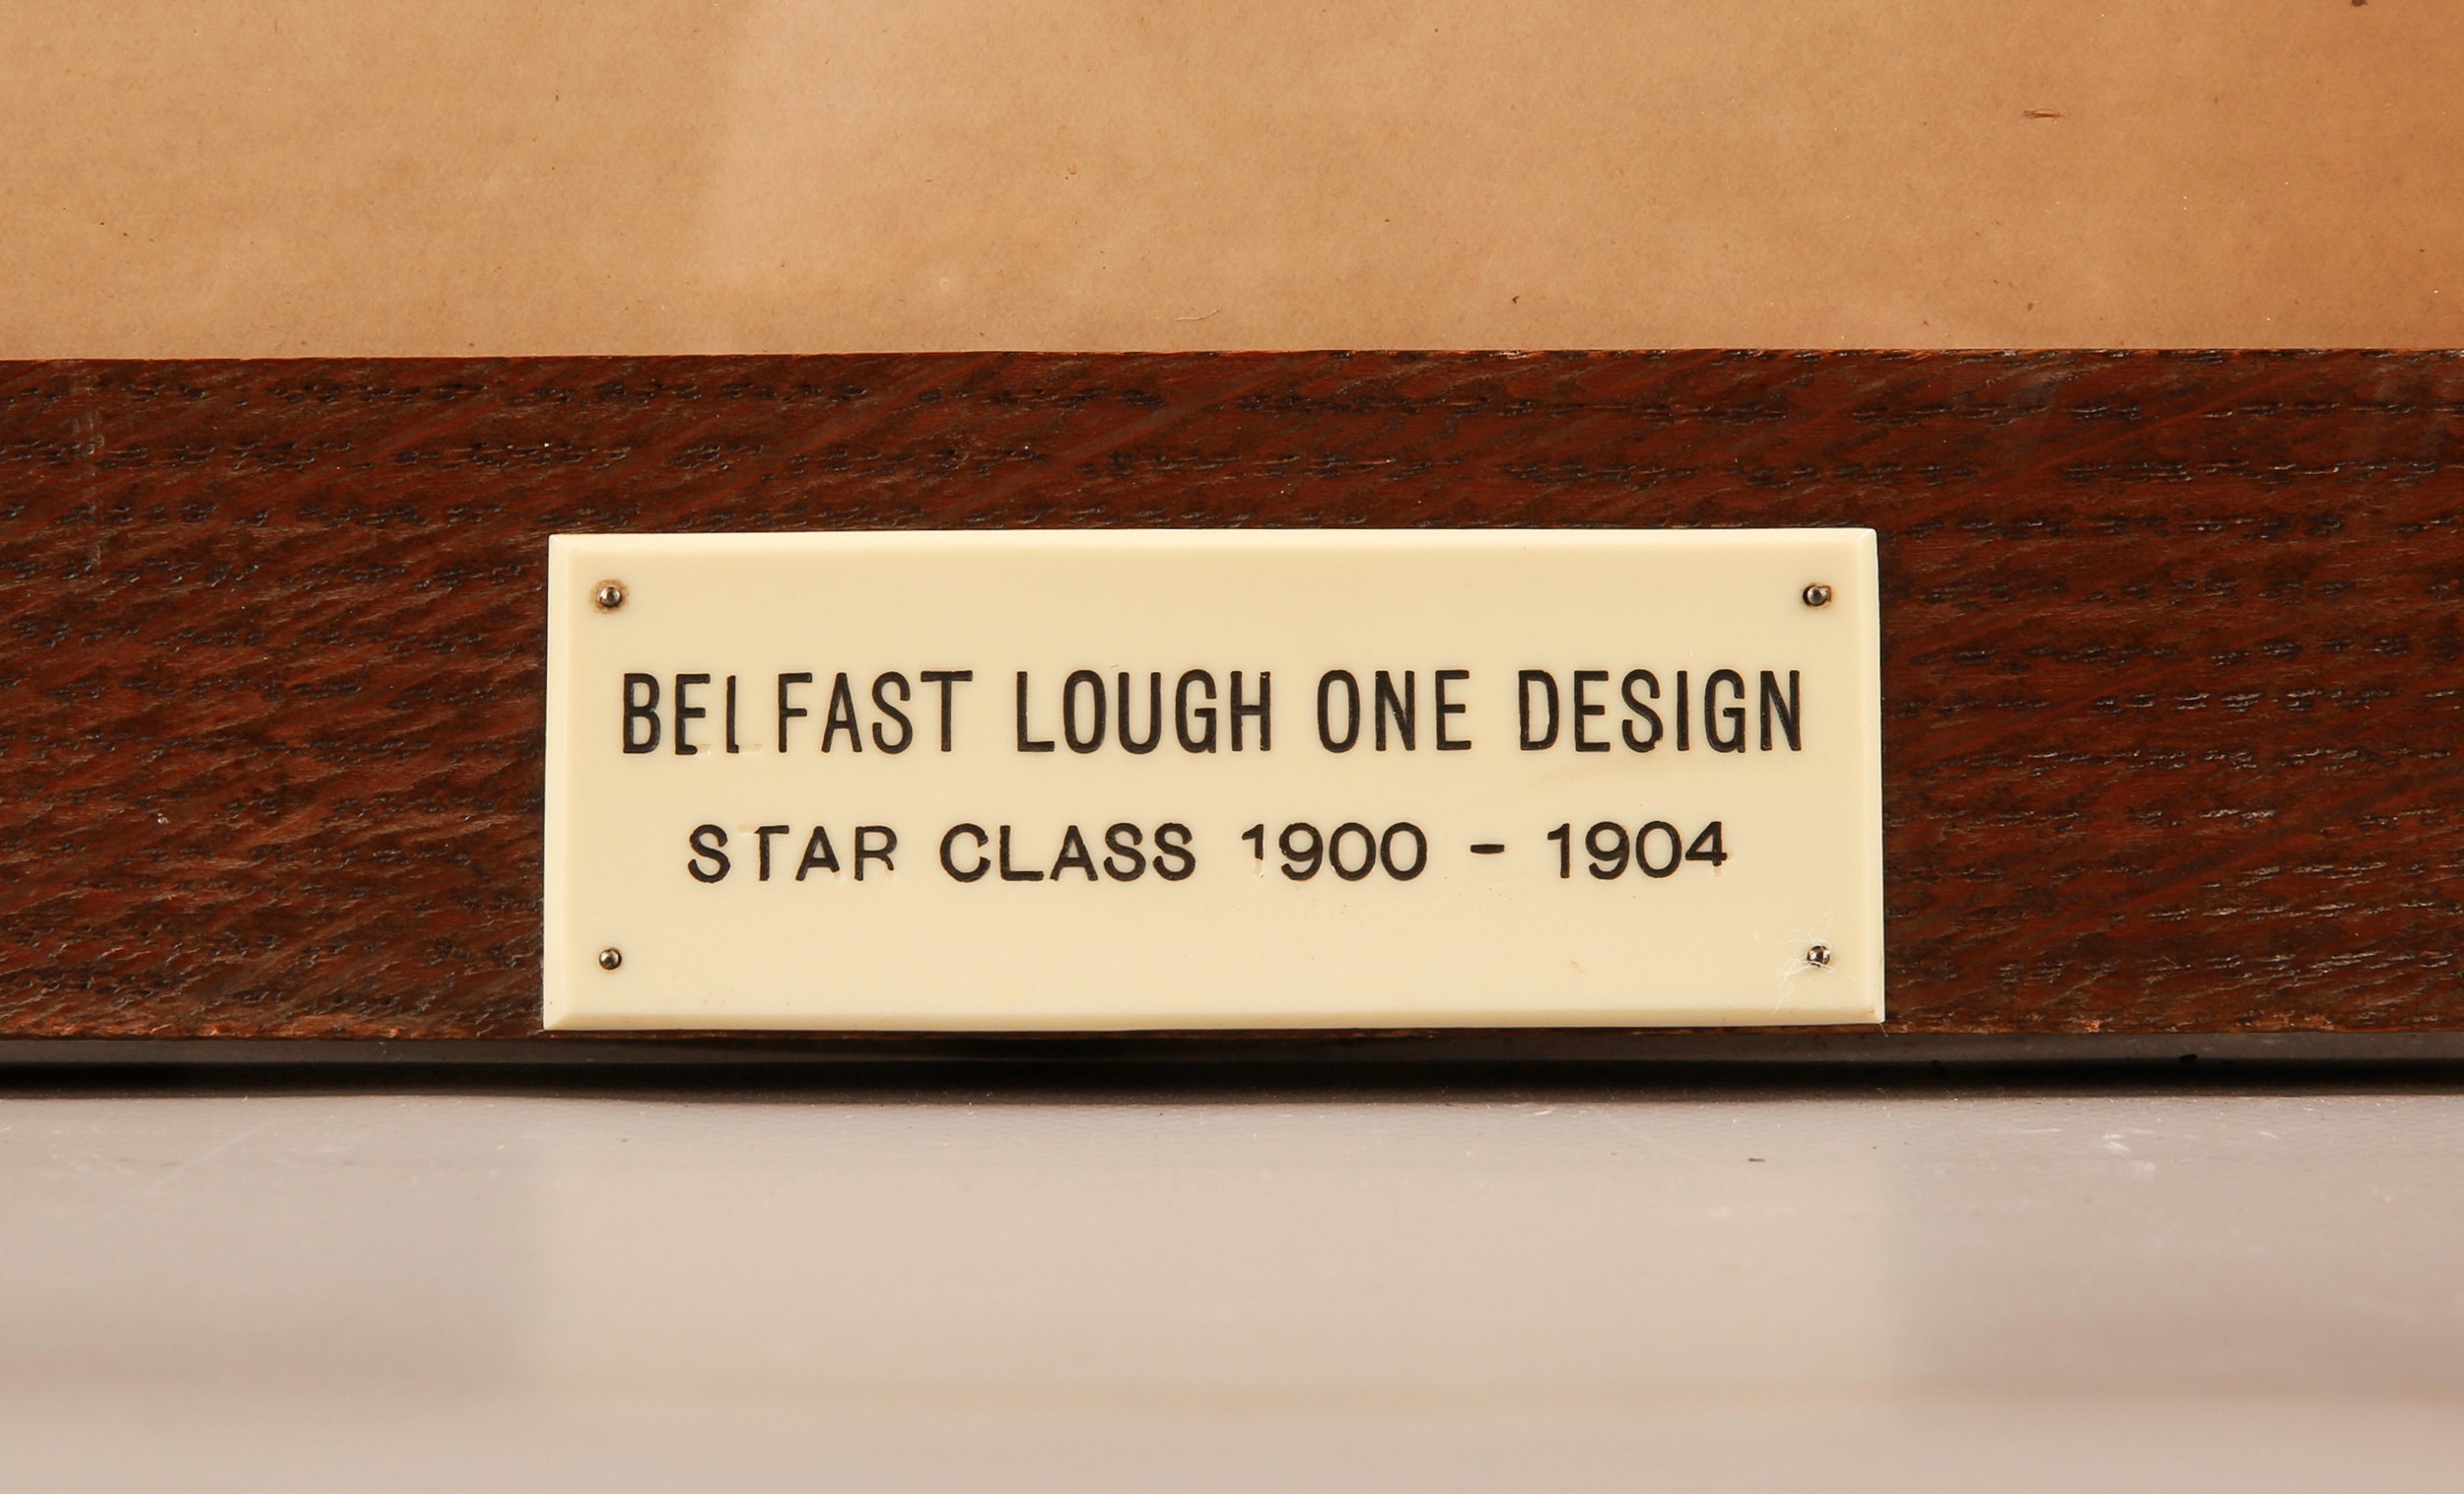 A Print of the Belfast Lough One Design Star Class 1900-04 65x80cm #64 - Image 2 of 2